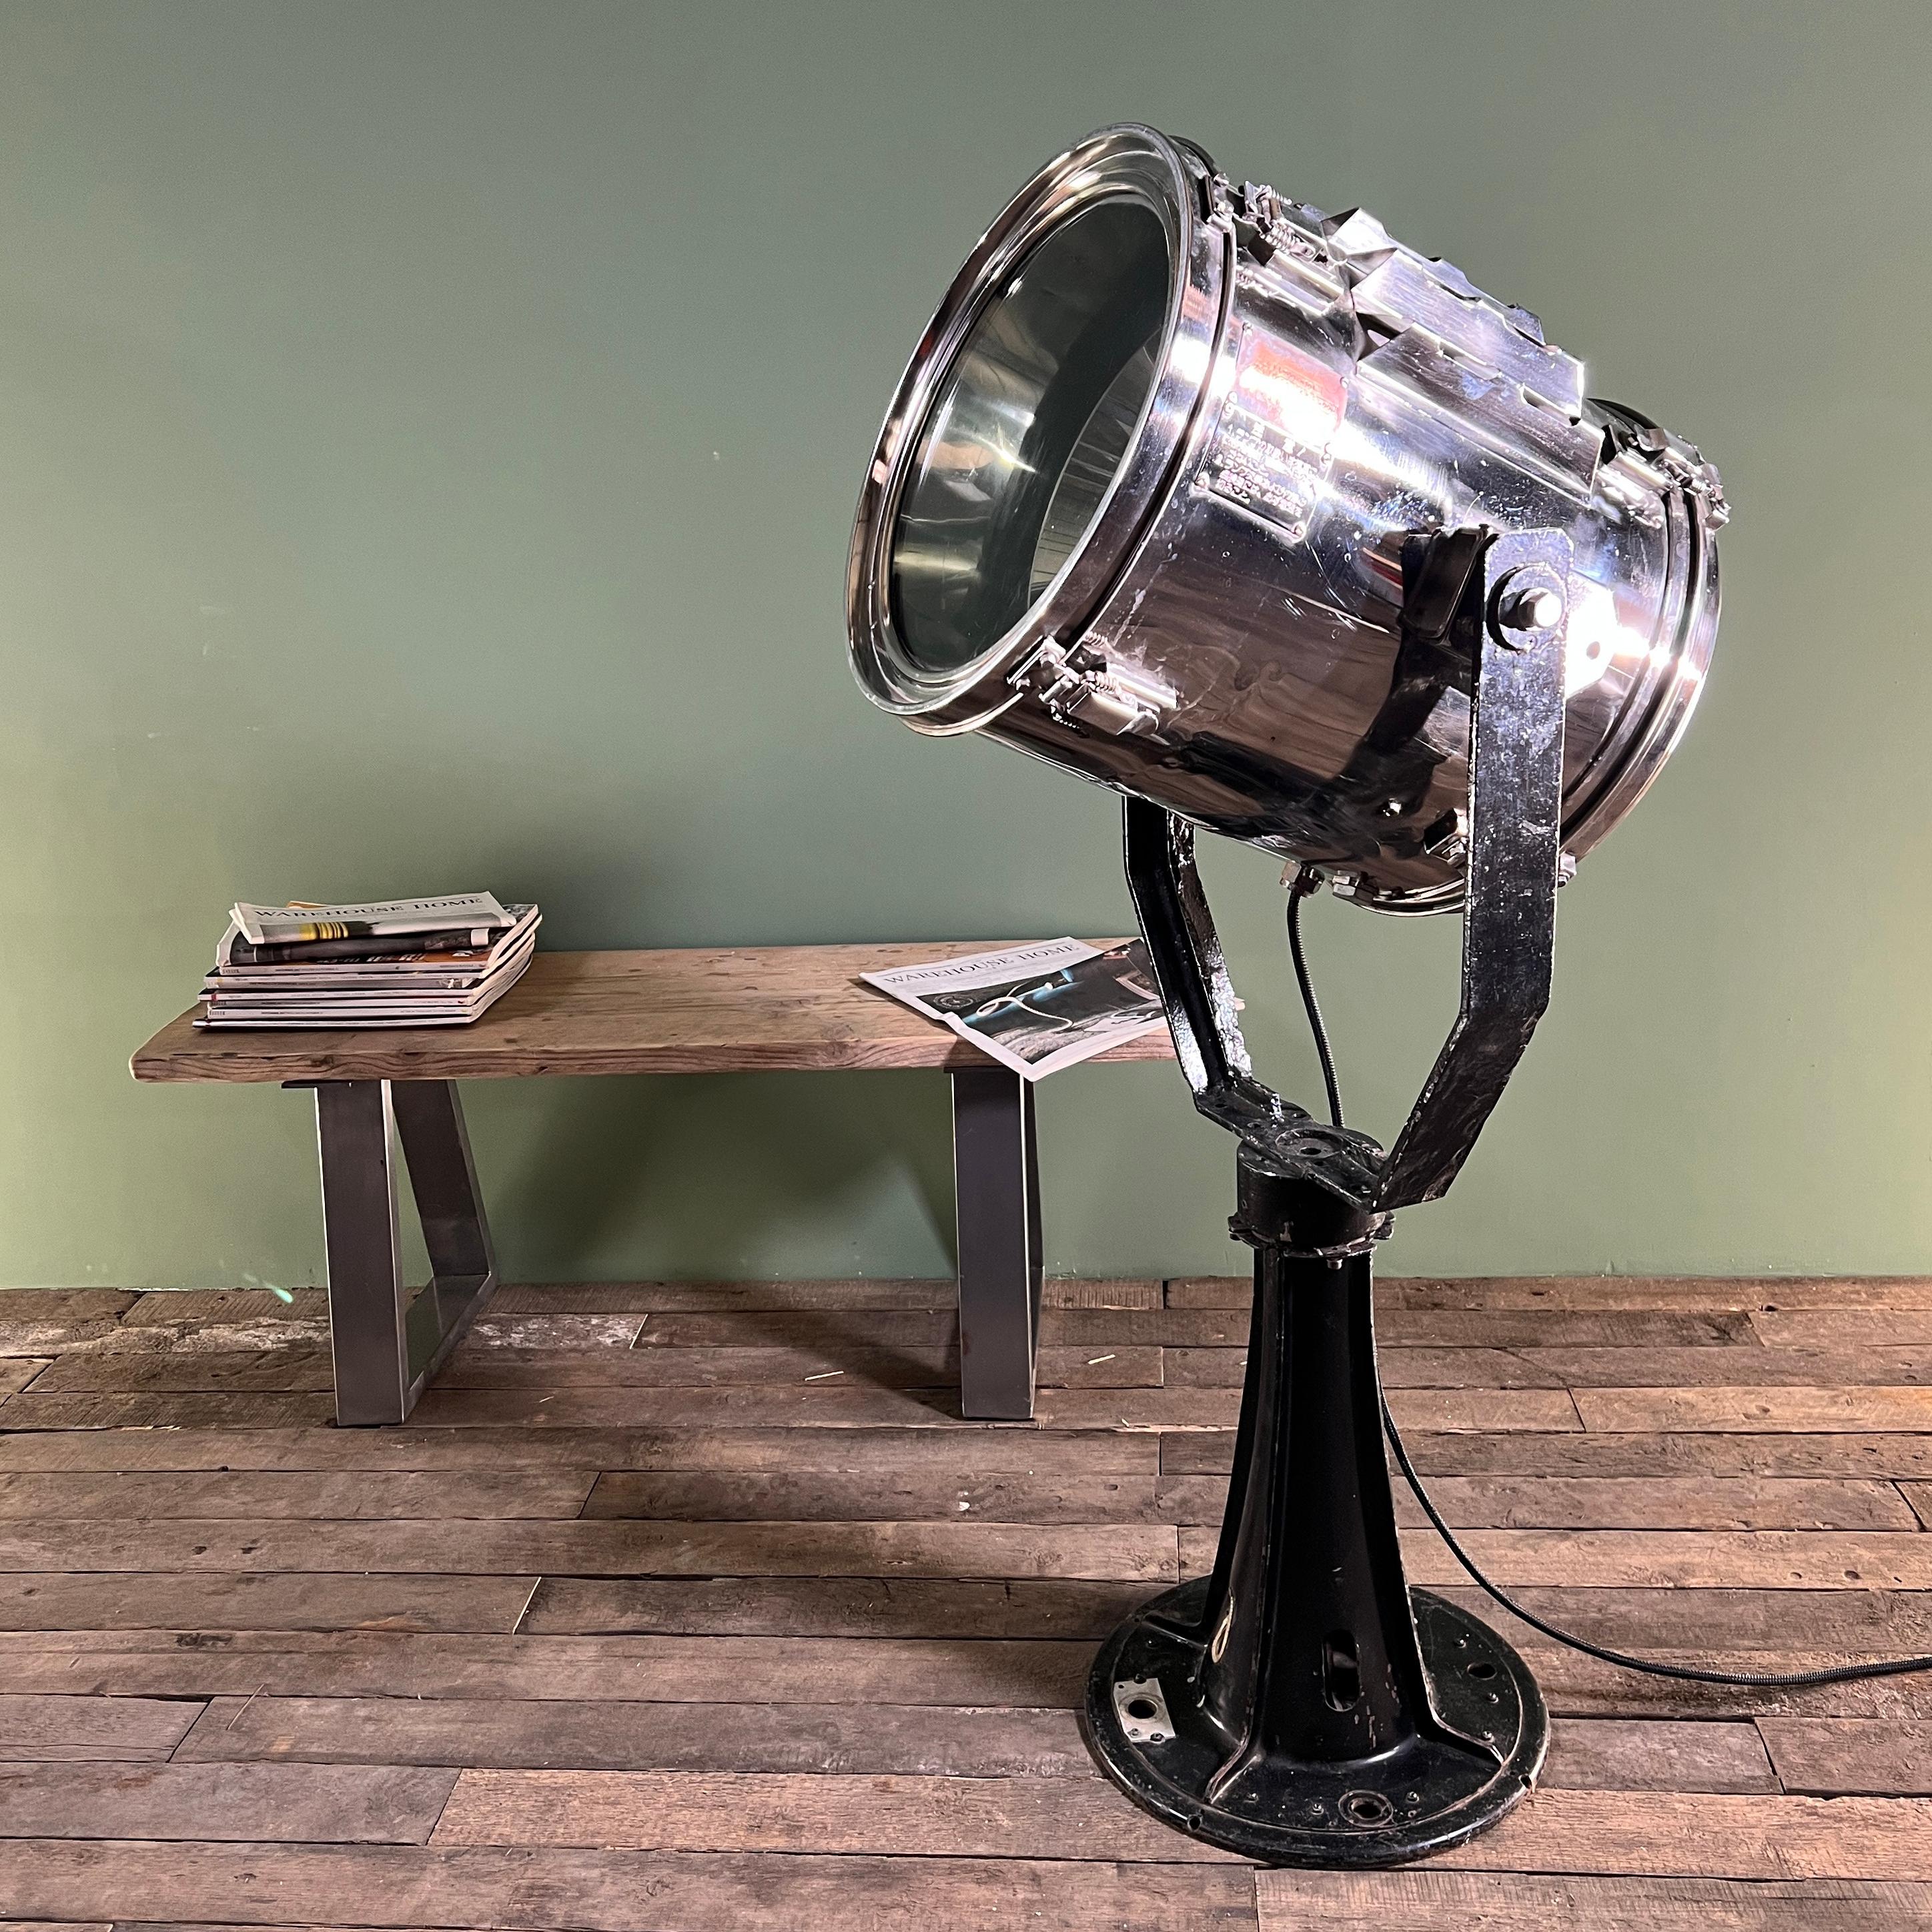 This industrial floor lamp is a vintage marine searchlight reclaimed from decommissioned ships of Japanese origin. Professionally restored and ready to add interest to any modern interior. 

Specifications
Height: 115cm
Diameter: 40cm
Depth: